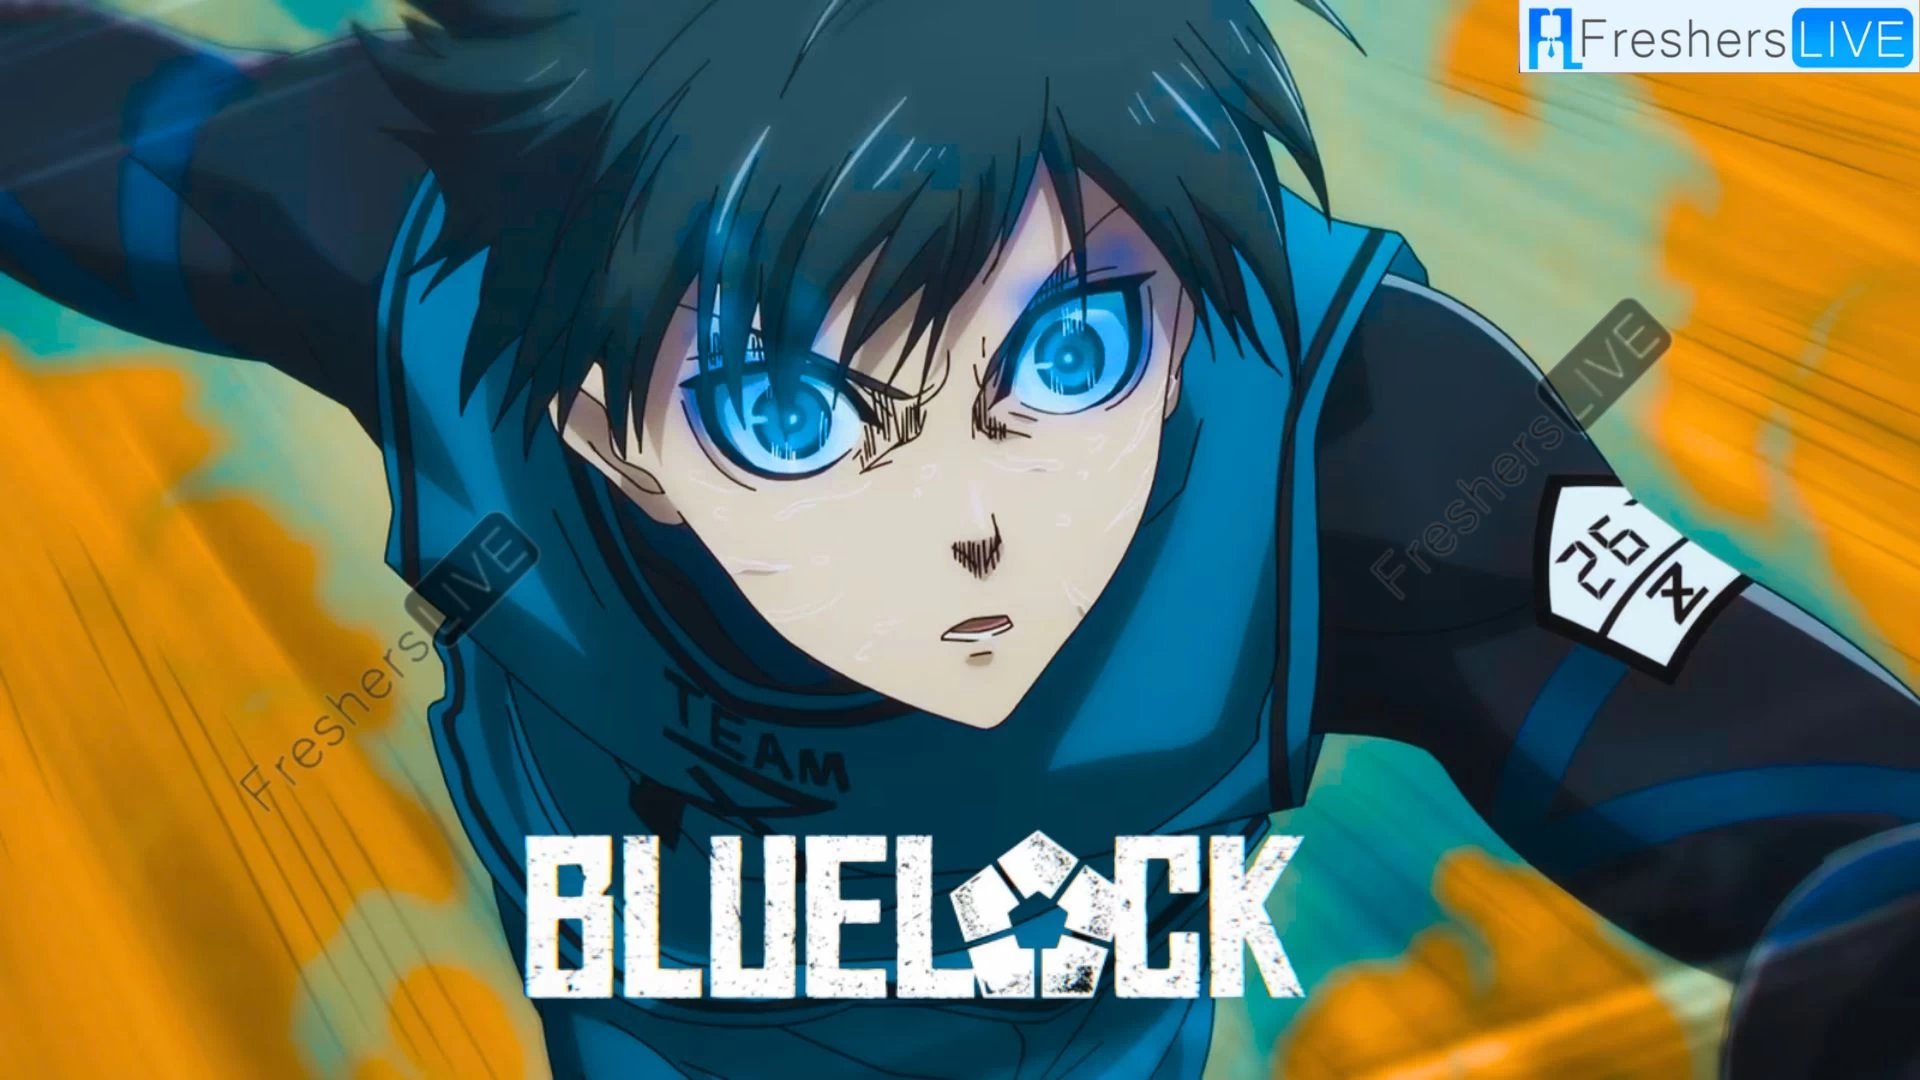 Blue Lock Chapter 235 Spoiler, Release Date, Raw Scans, Count Down, and More